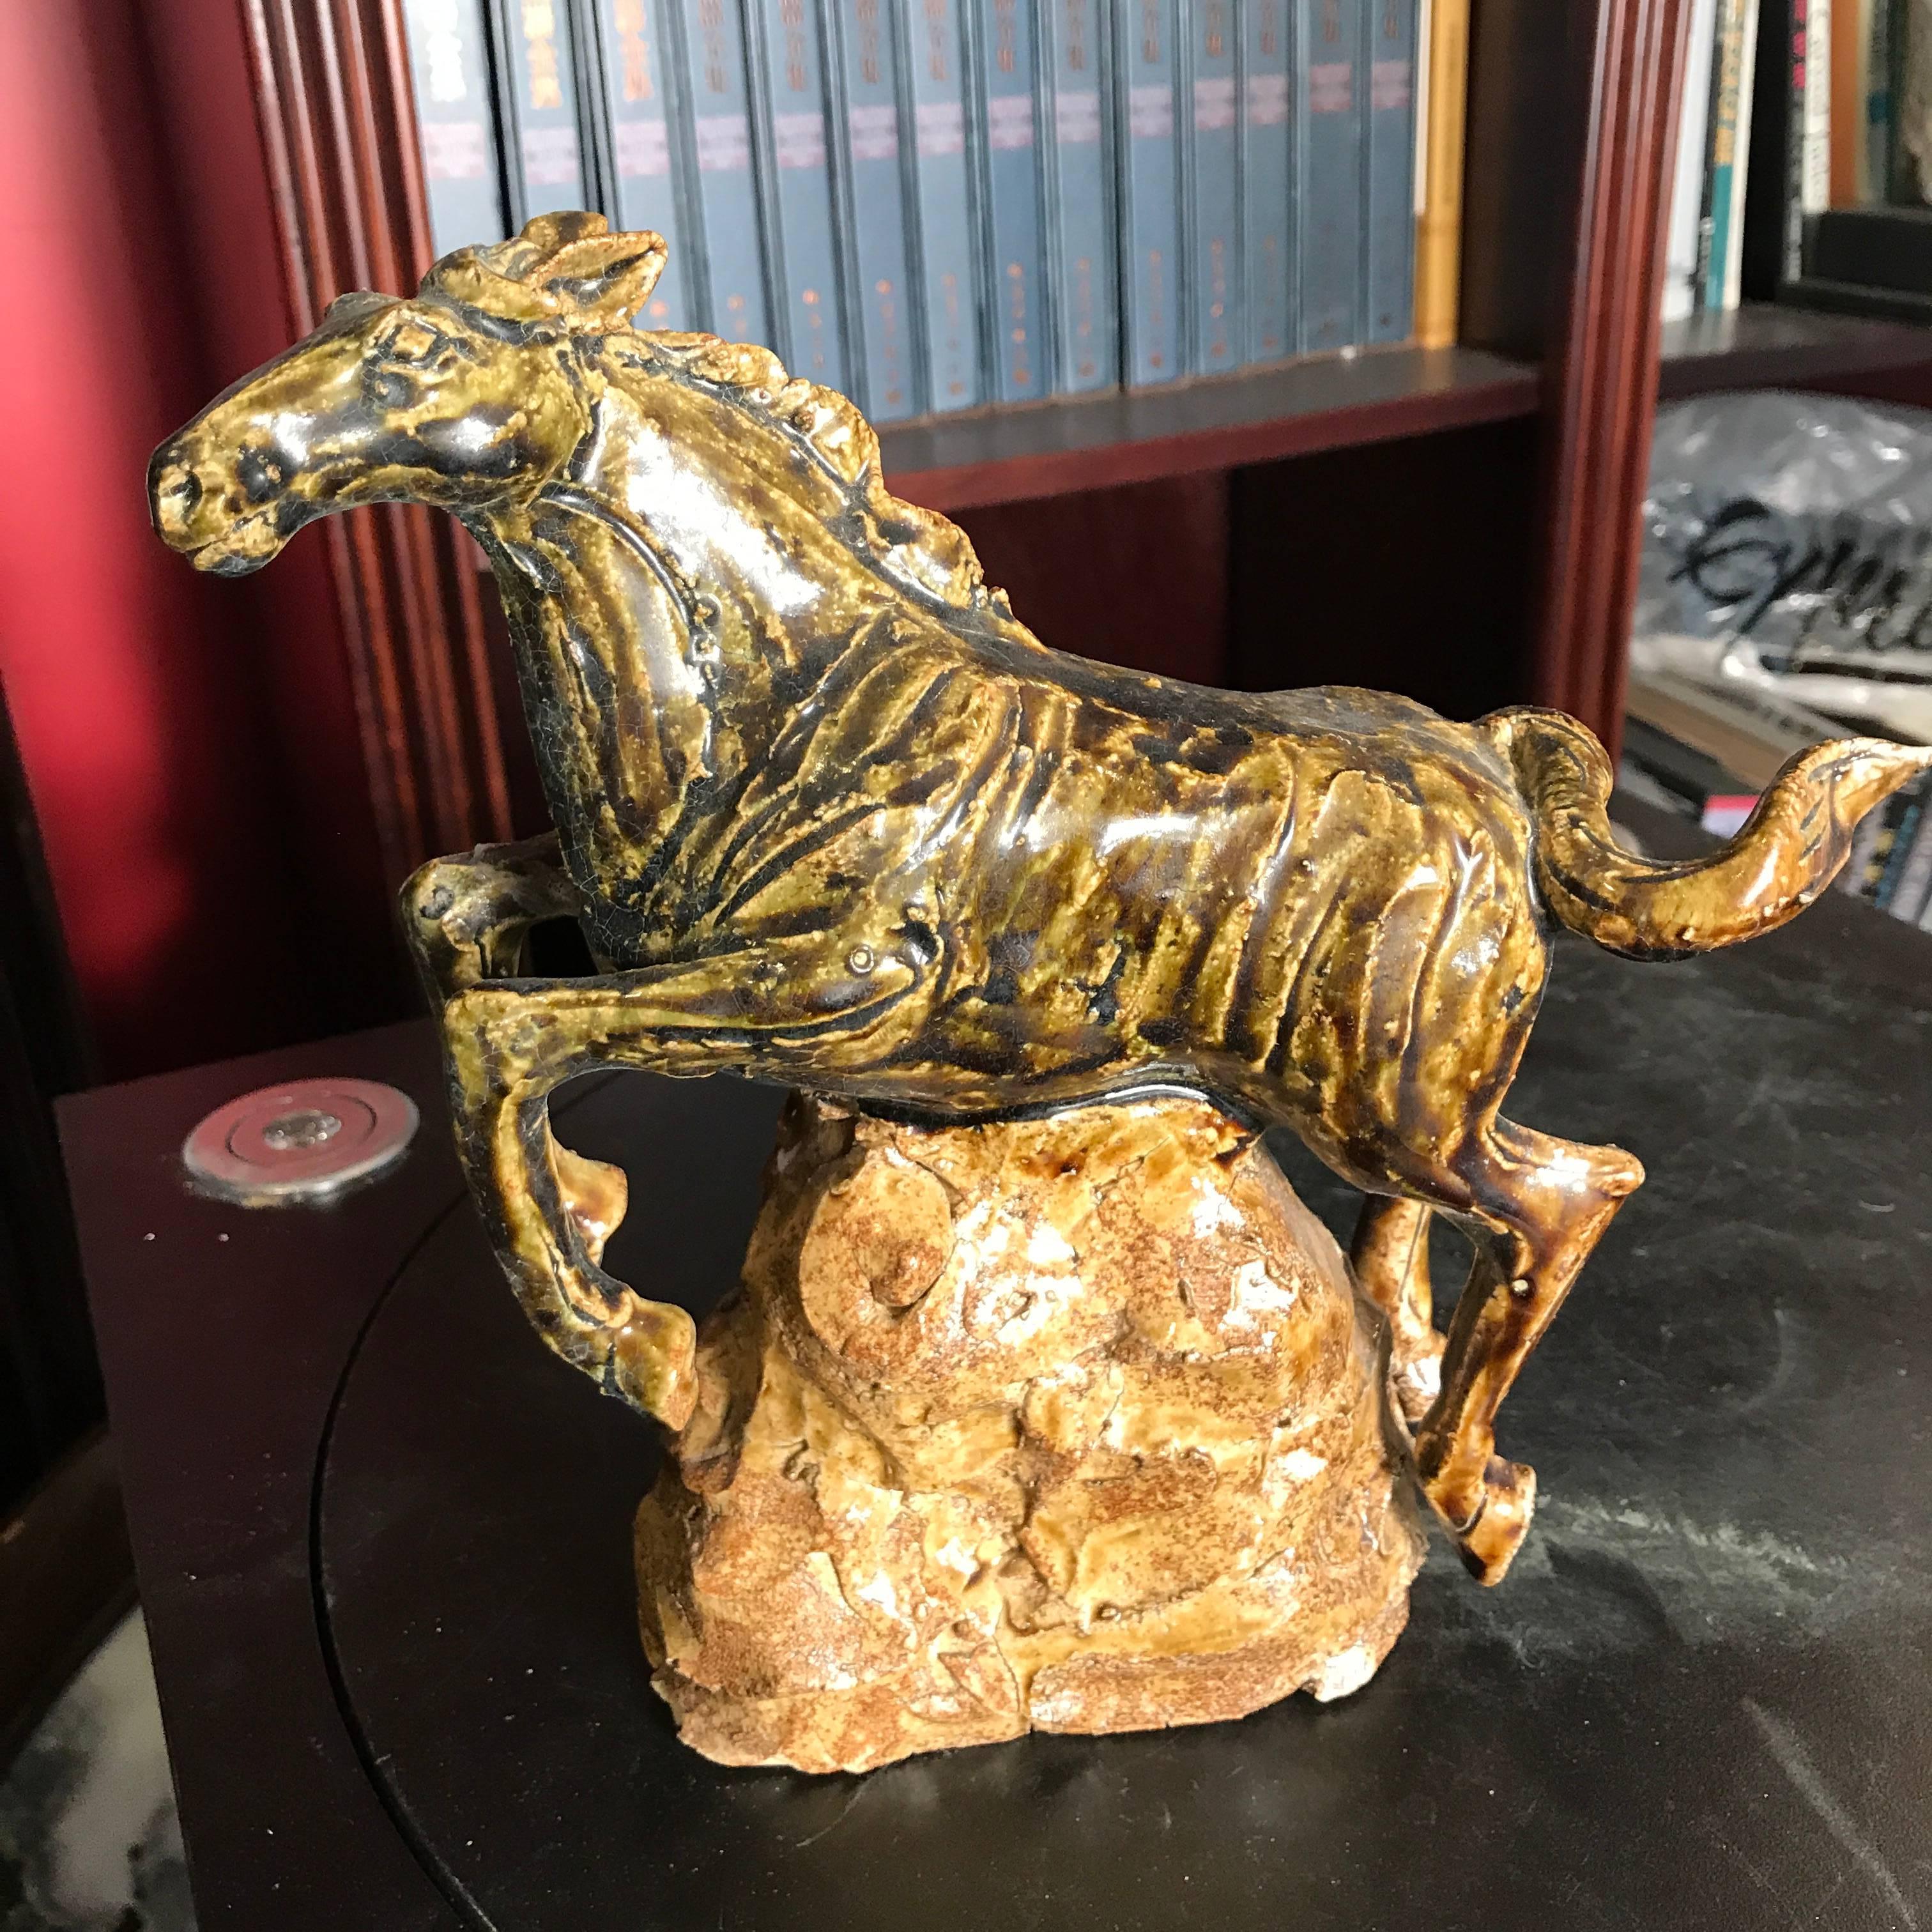 Hand-Crafted Japan Fine Old Galloping Horse Handmade and Hand-Painted Ceramic Sculpture